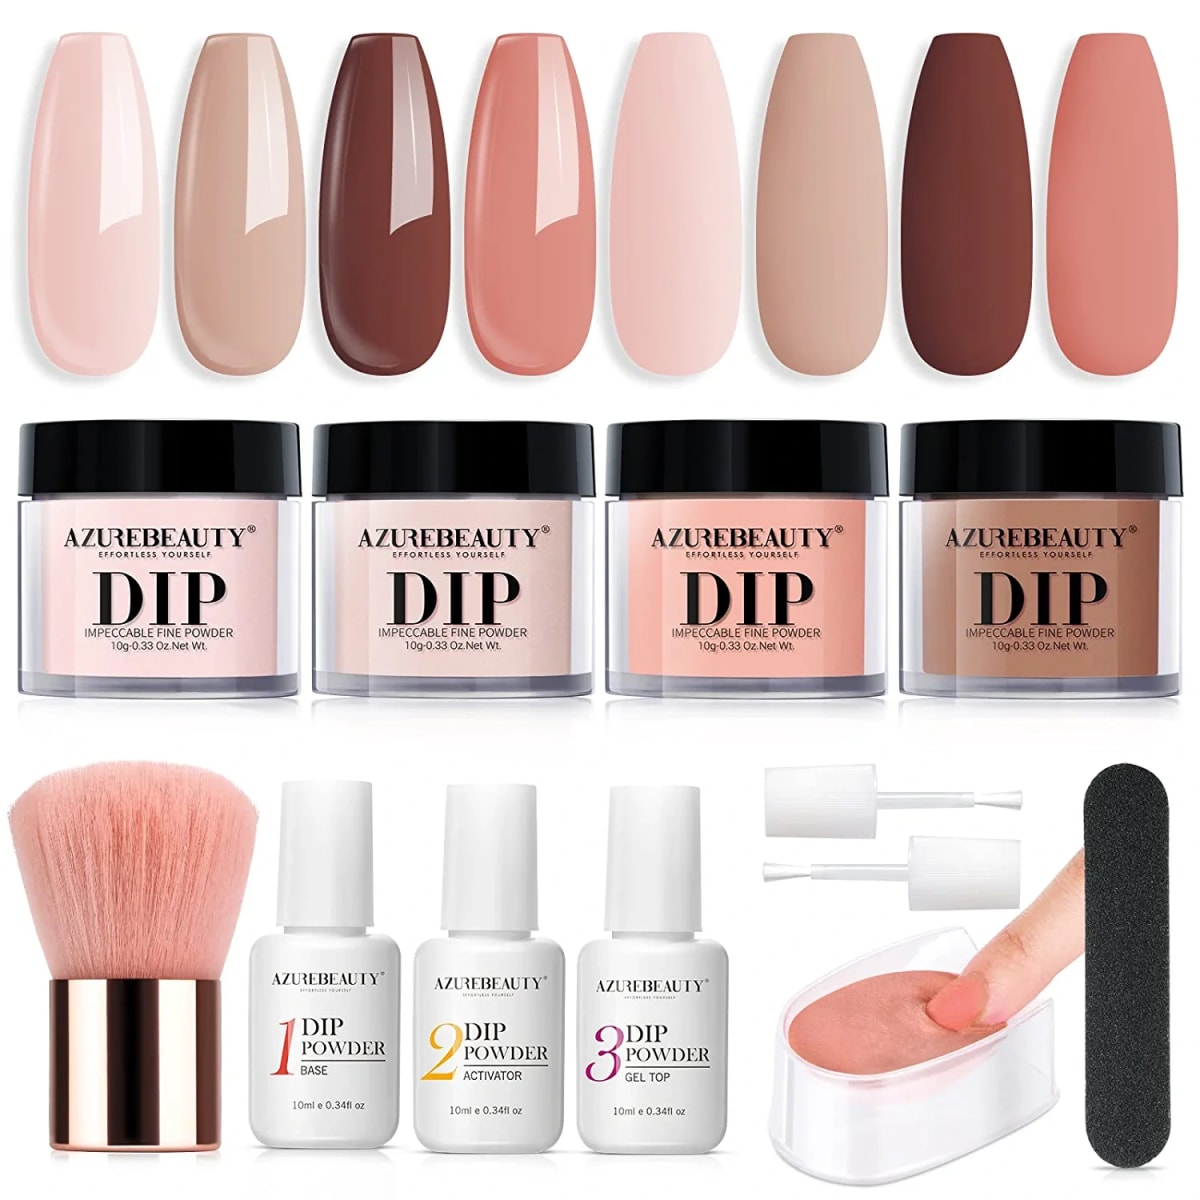 Dip Powder Nail Kit Starter, Skin Tone Fall Winter Nude Brown 4 Colors Acrylic Dipping Powder Liquid Set with Base/Top Coat Activator for French Nail Art Manicure DIY Gift